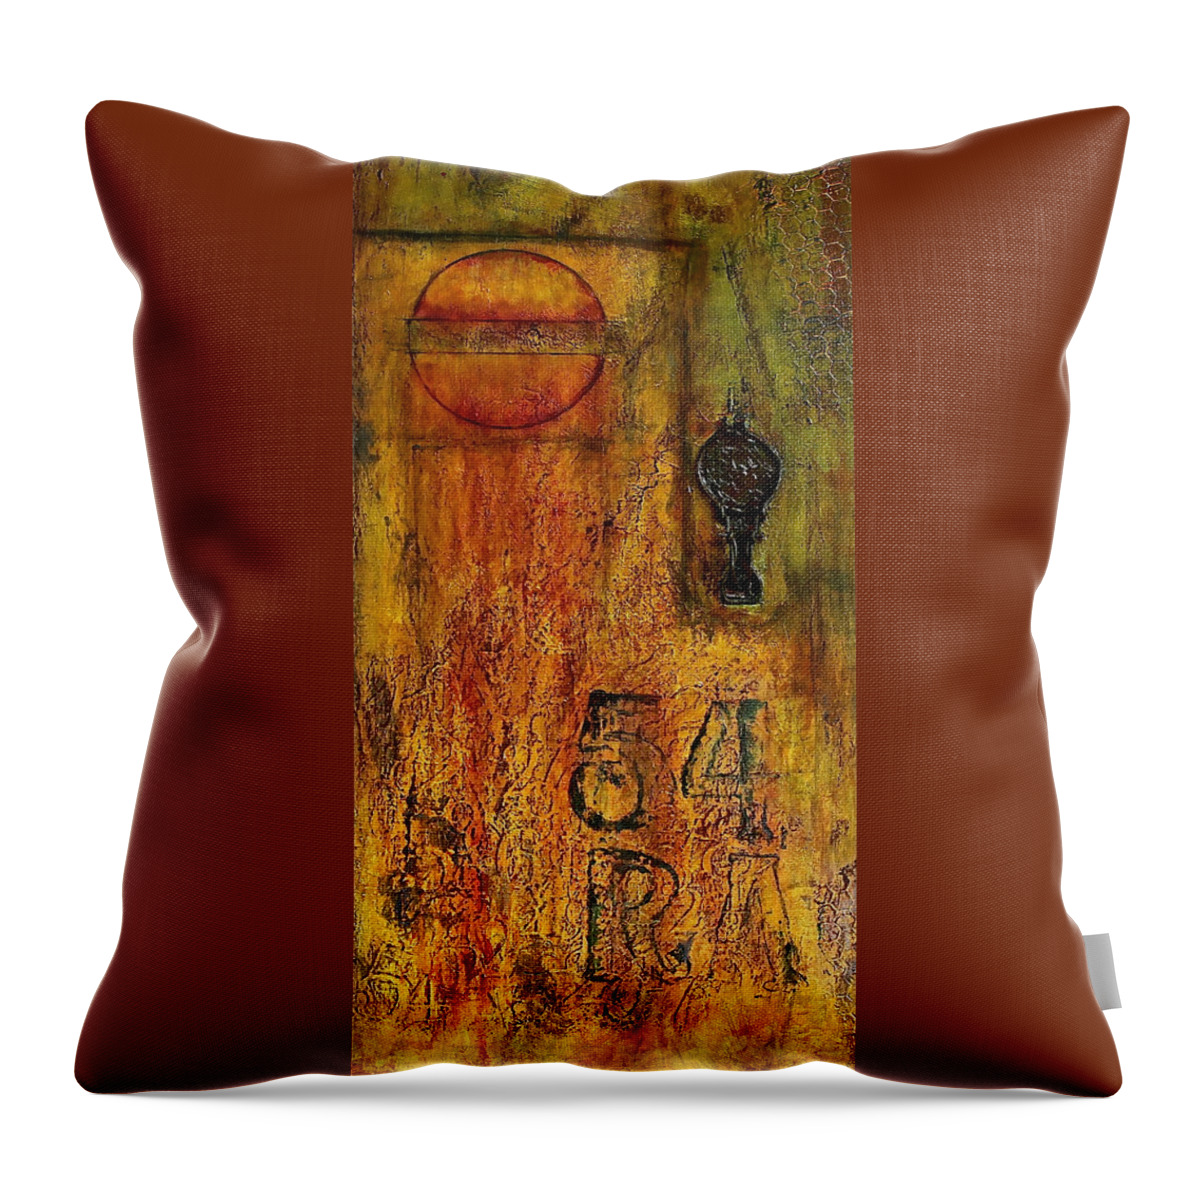 Mixed Media Throw Pillow featuring the painting Tattered Wall by Bellesouth Studio